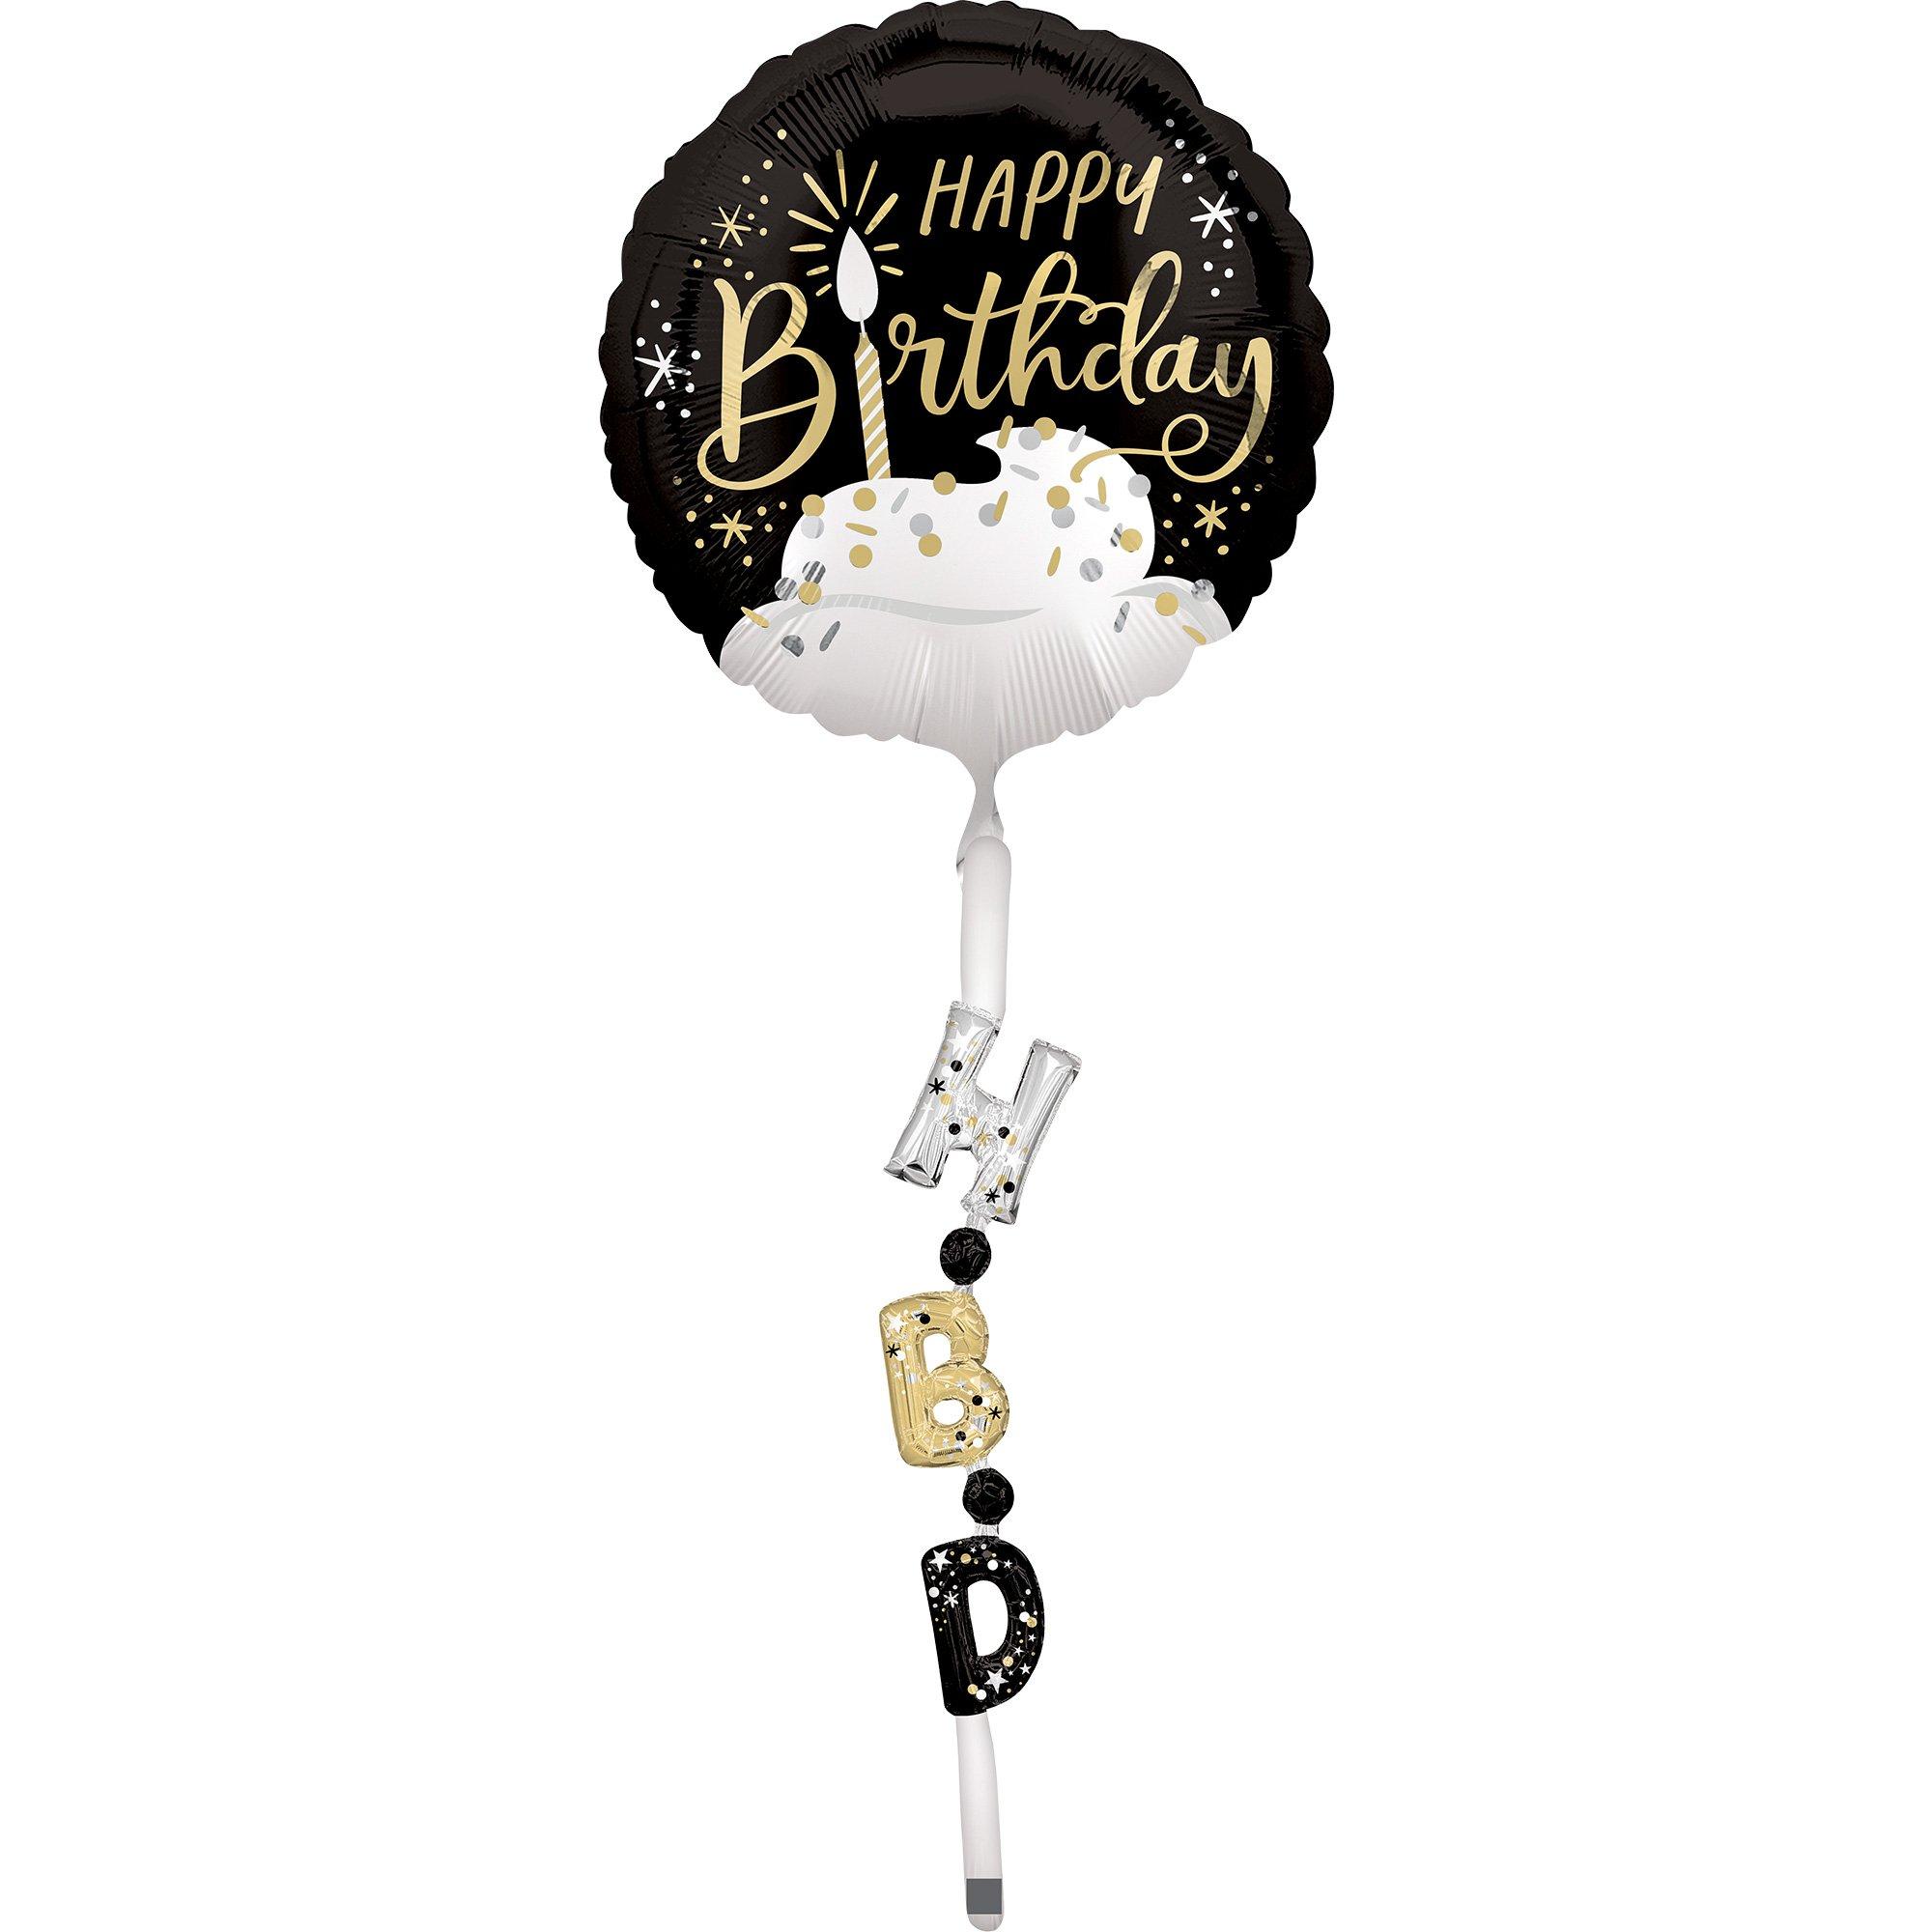 Satin Black, Silver & Gold Happy Birthday Foil Balloon (24in) with Balloon Tail (3.75ft)